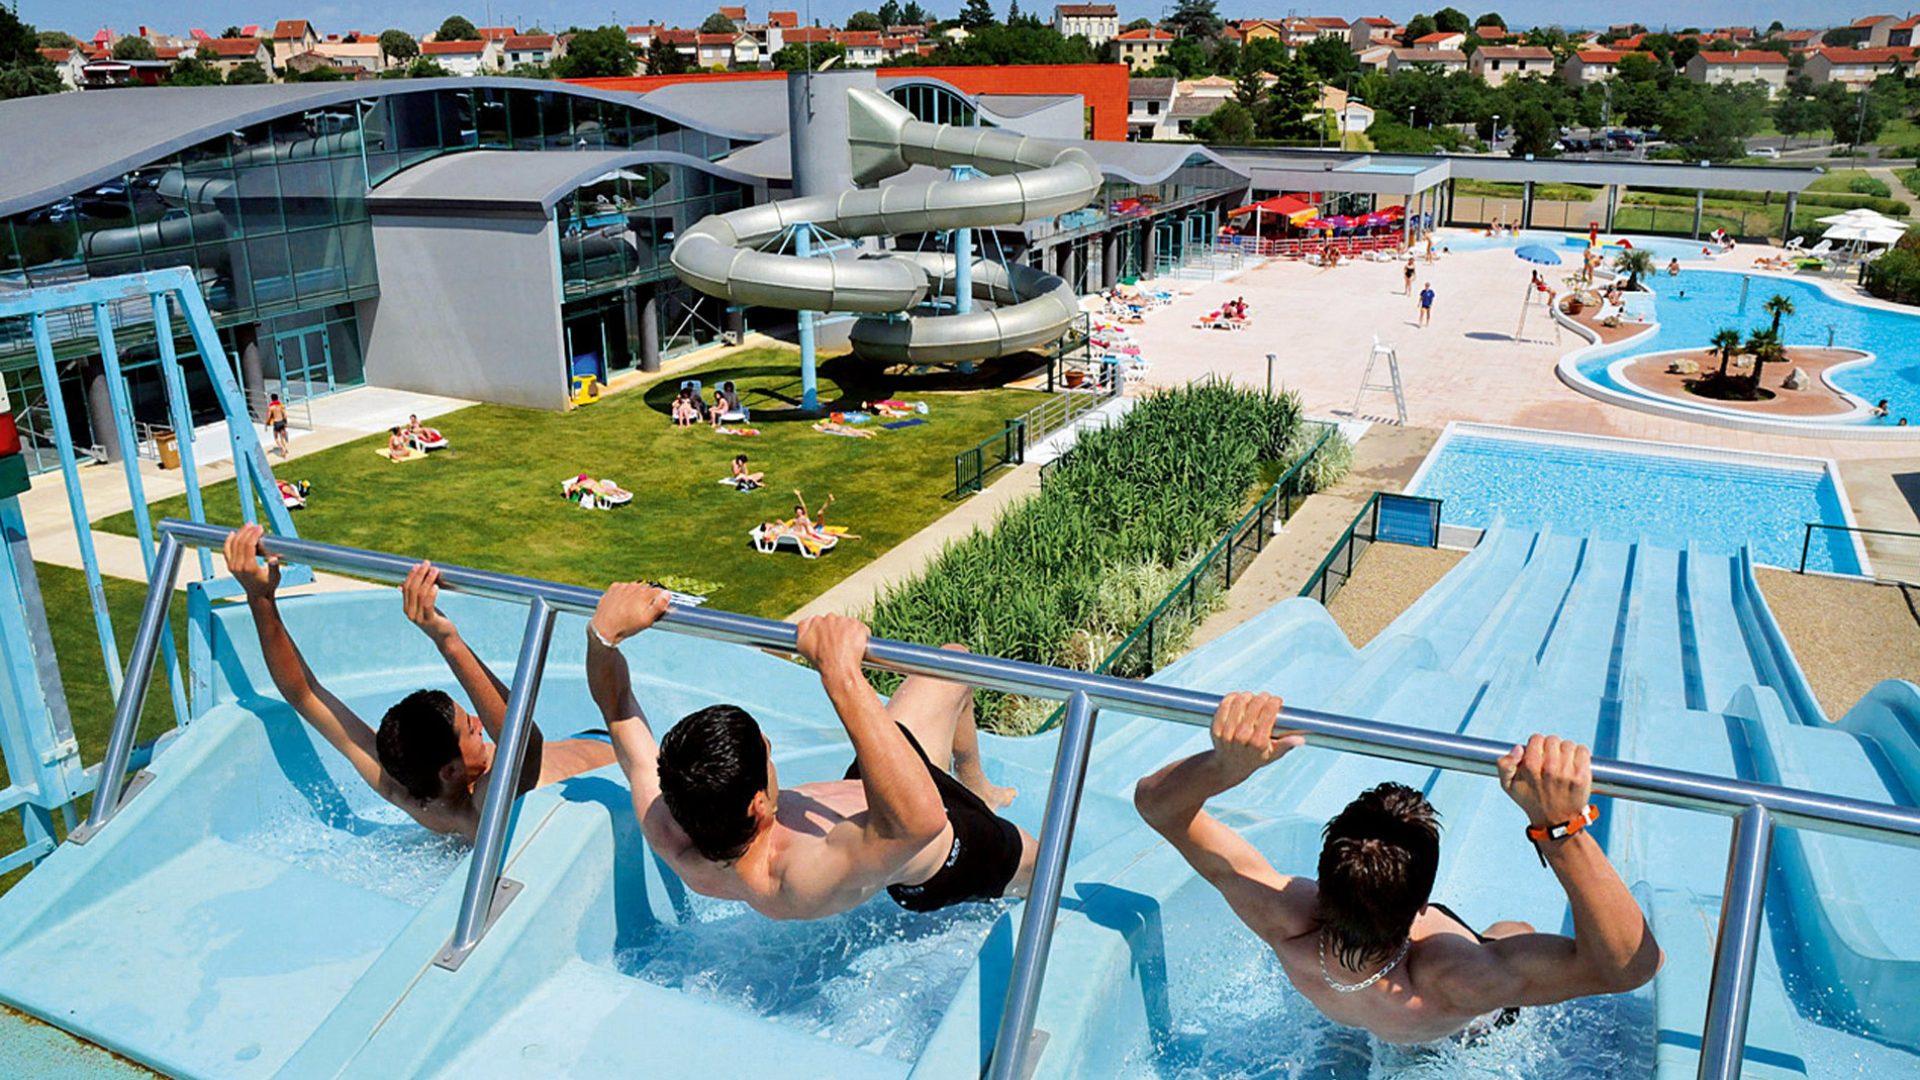 Albi - Atlantis Aquatic Area - sports and leisure, indoor and outdoor pools